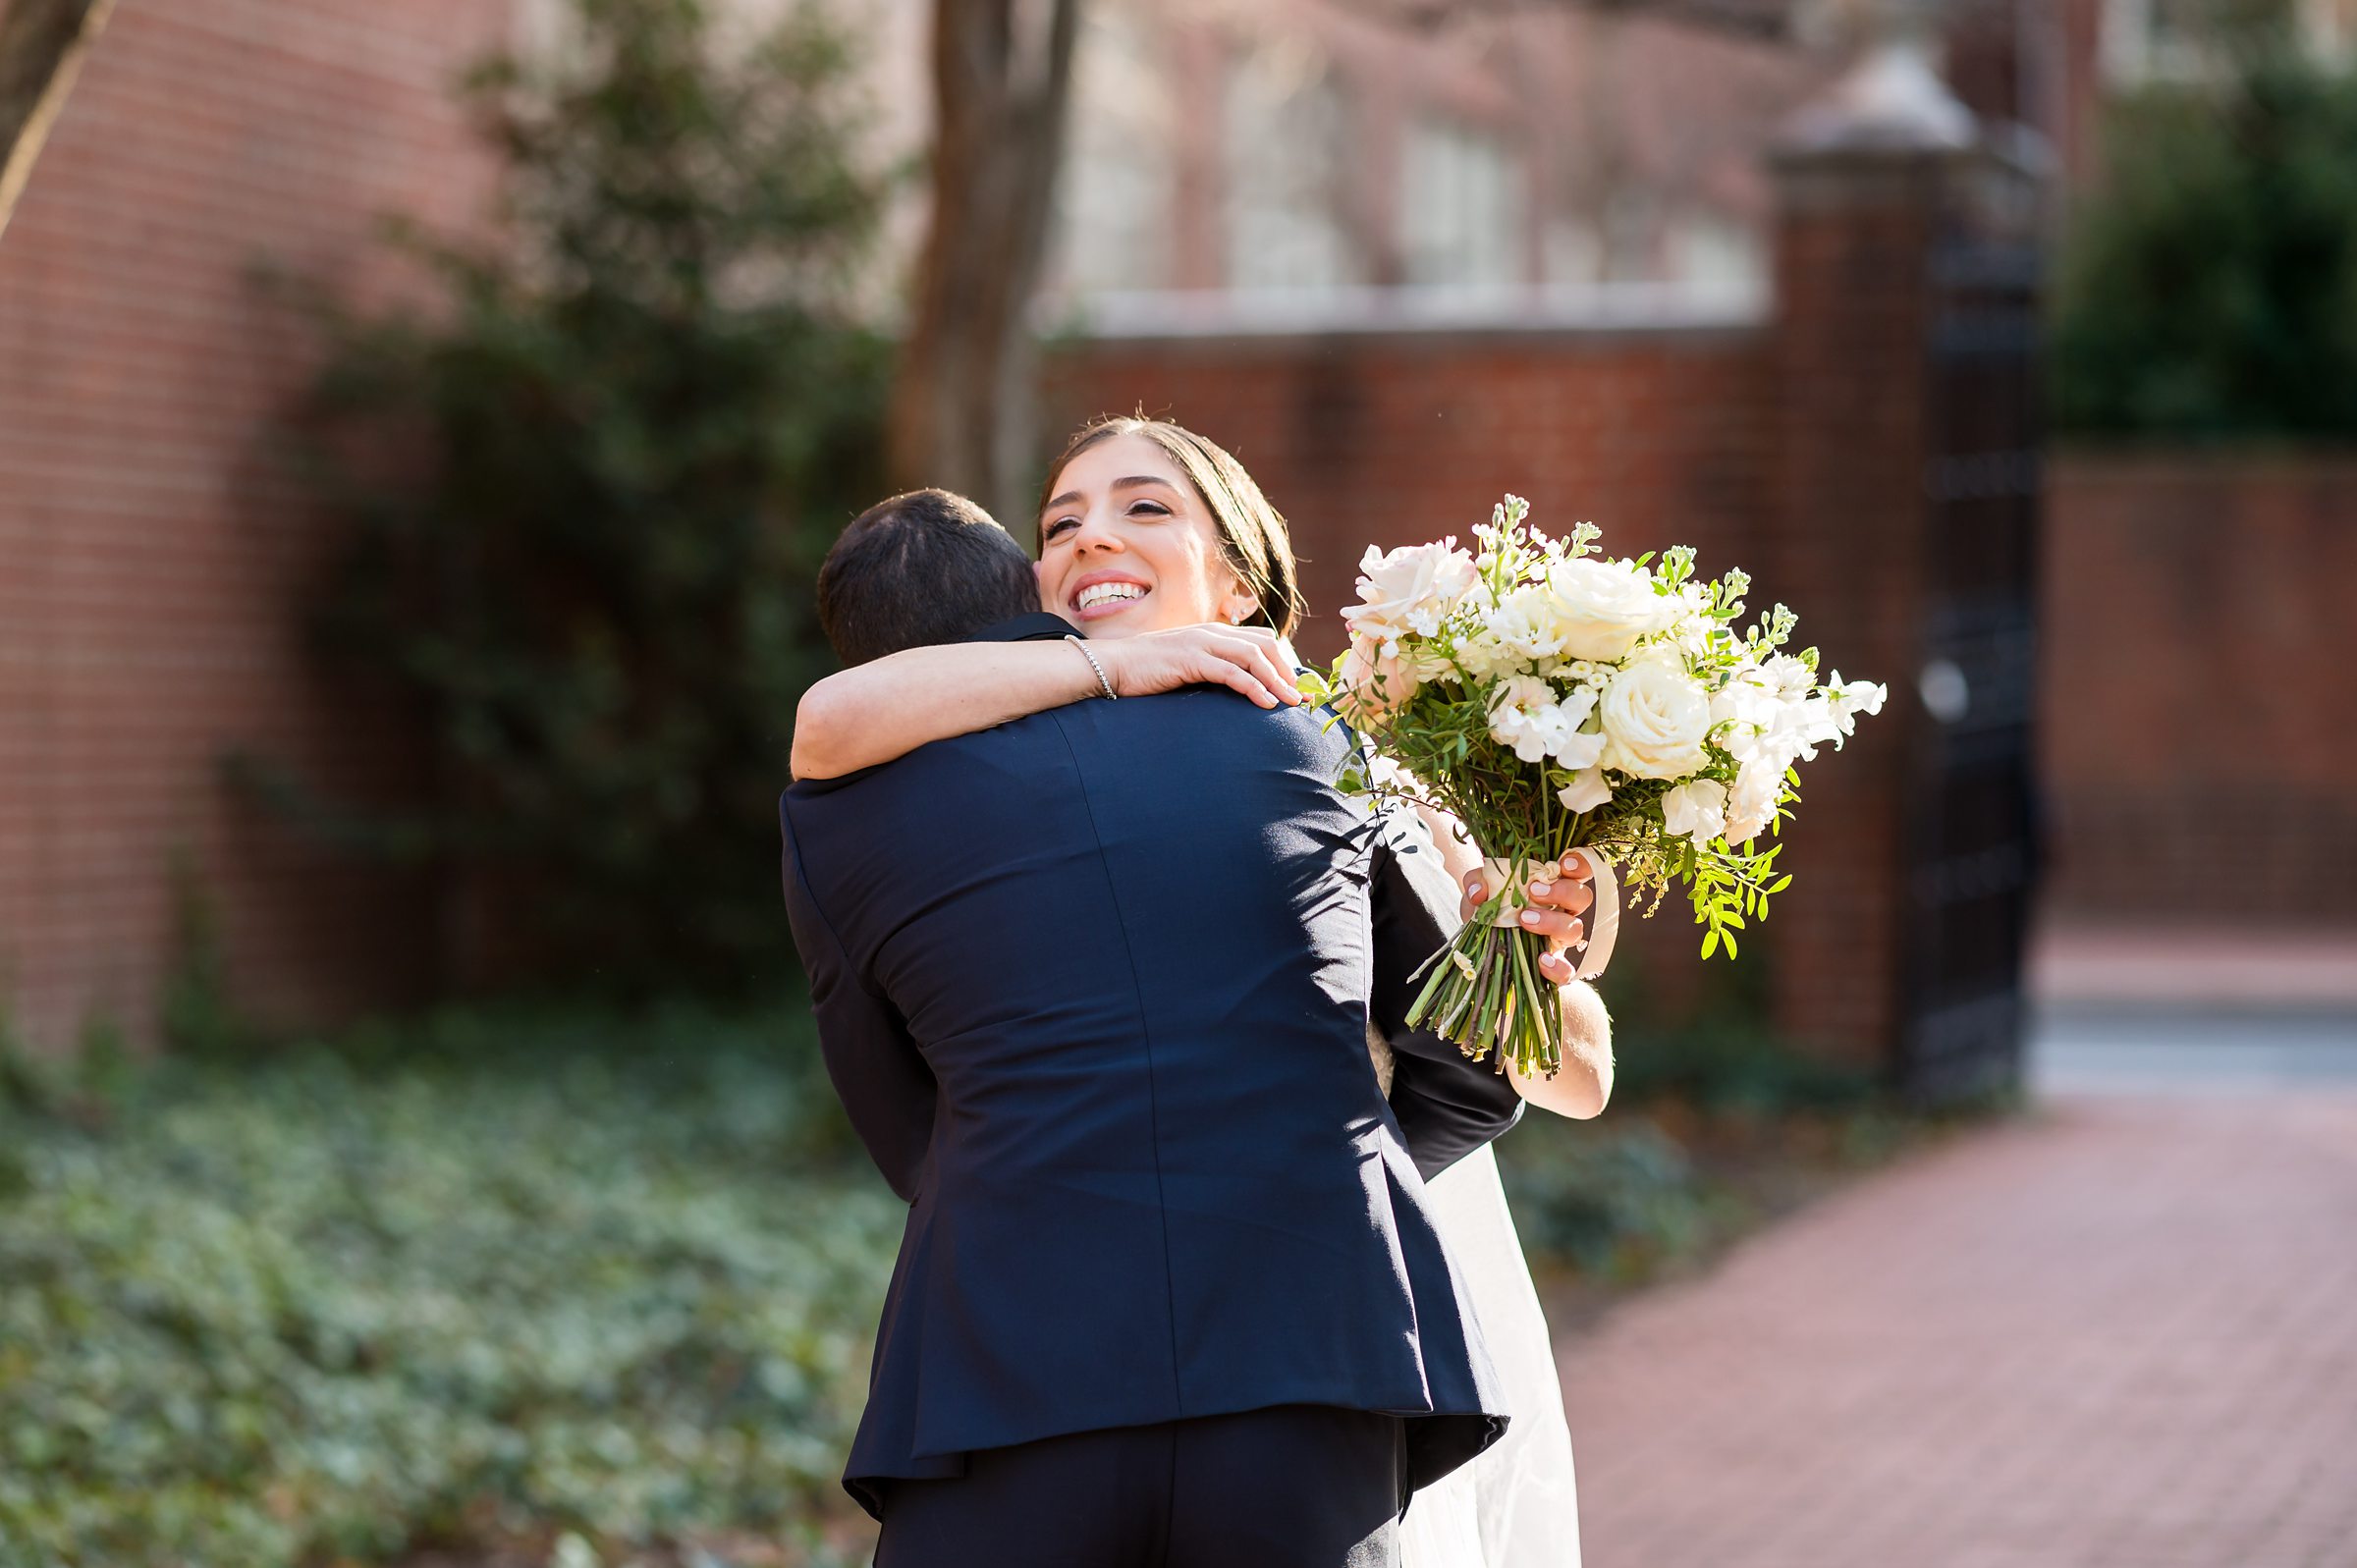 A bride and groom embrace lovingly in front of a brick building.